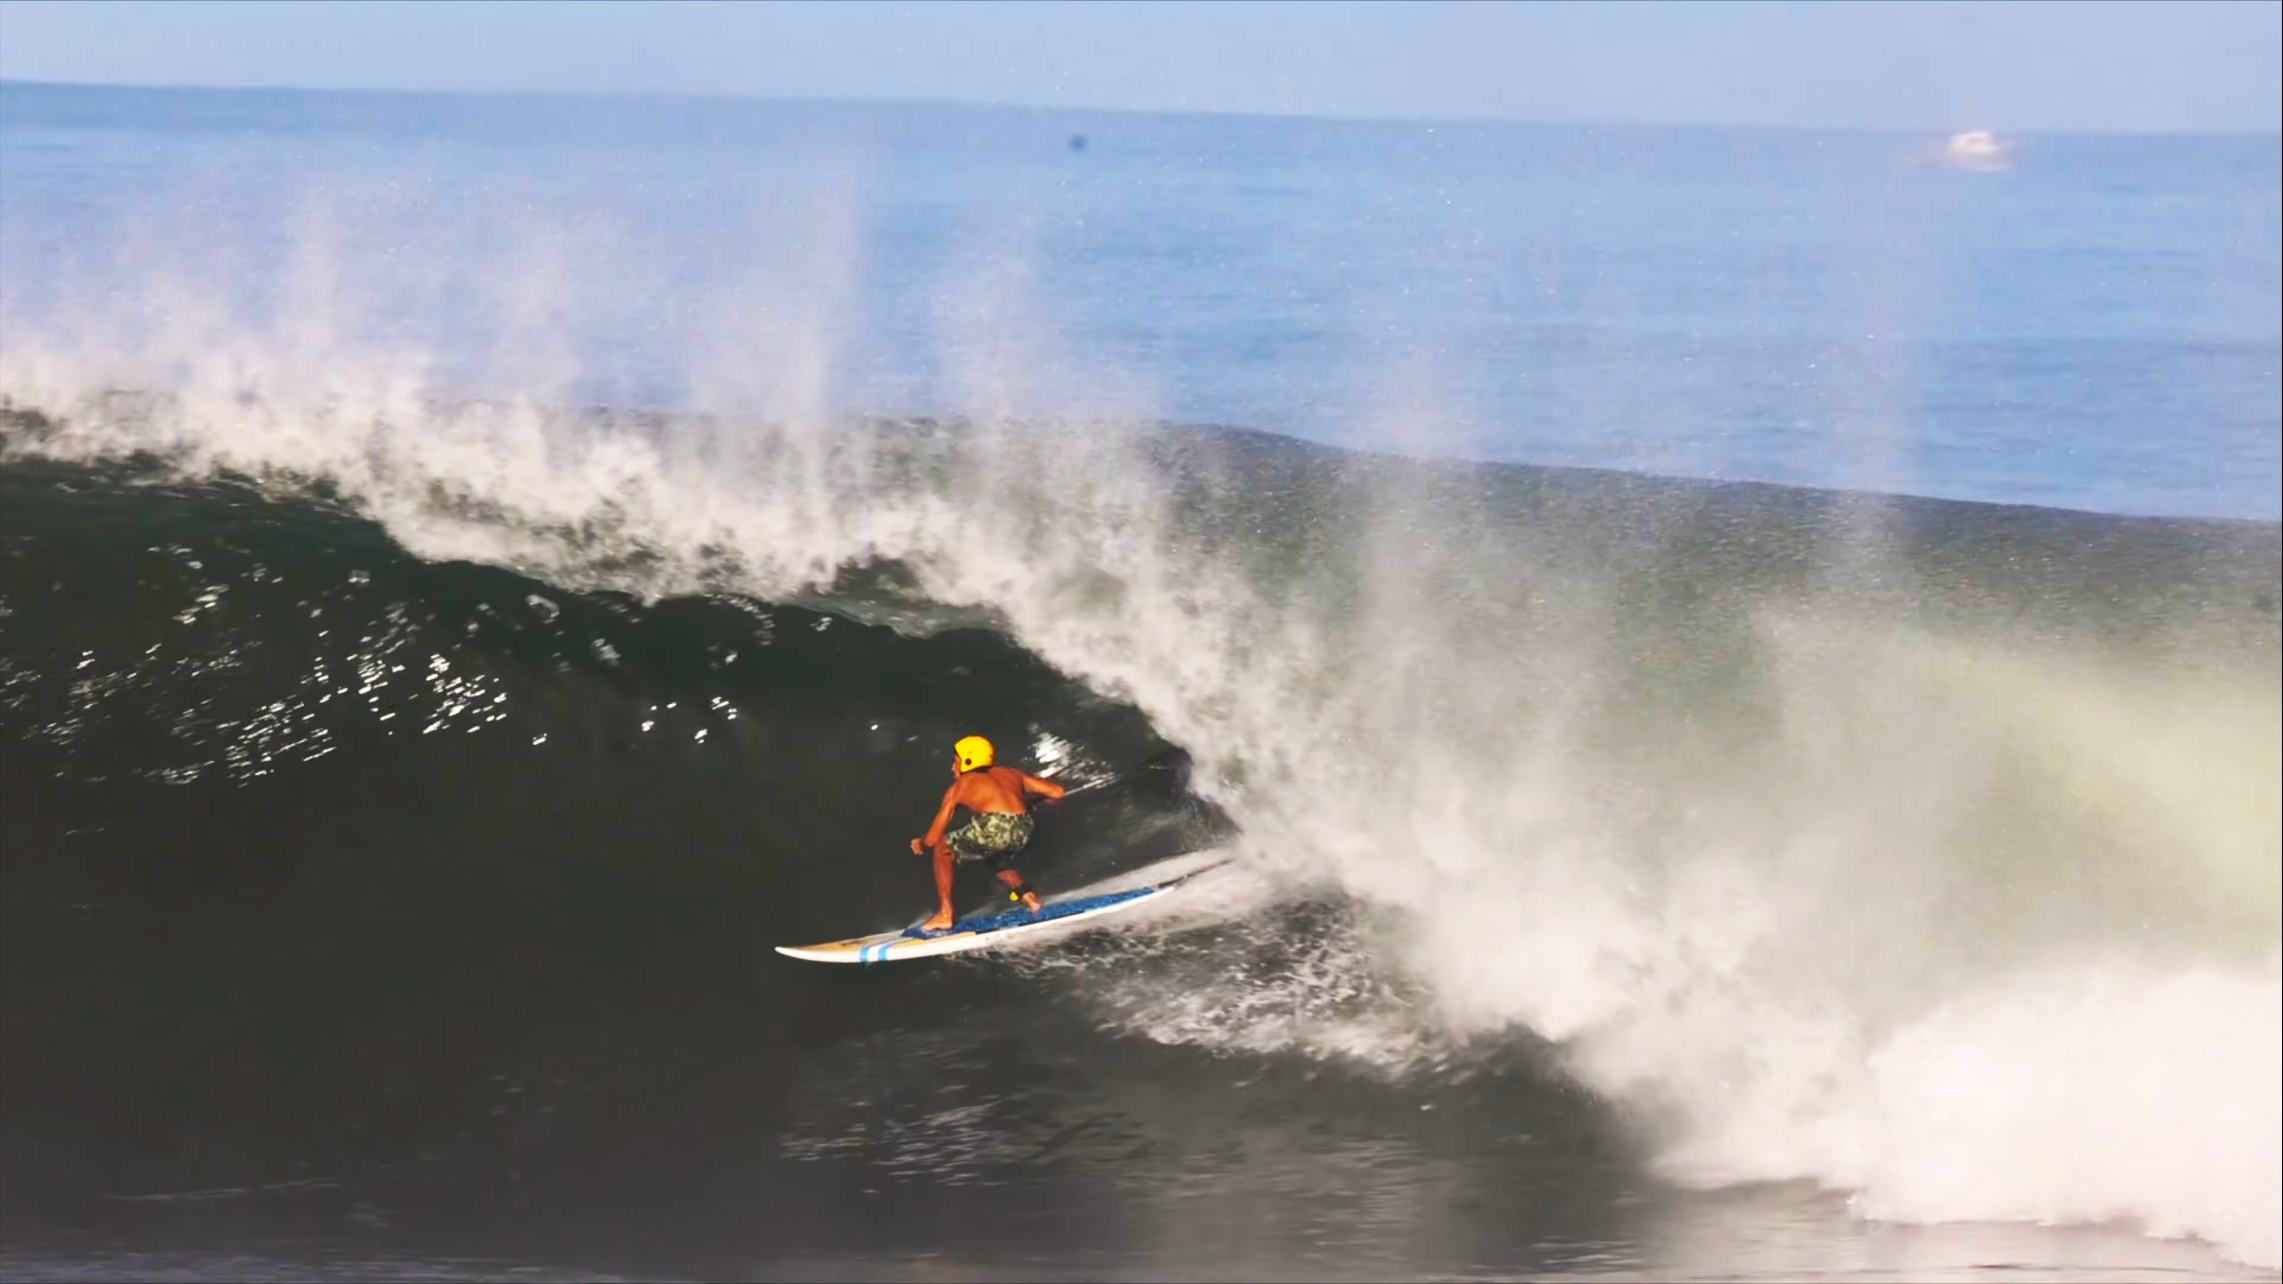 Zane Saenz about to get a Backdoor shack.